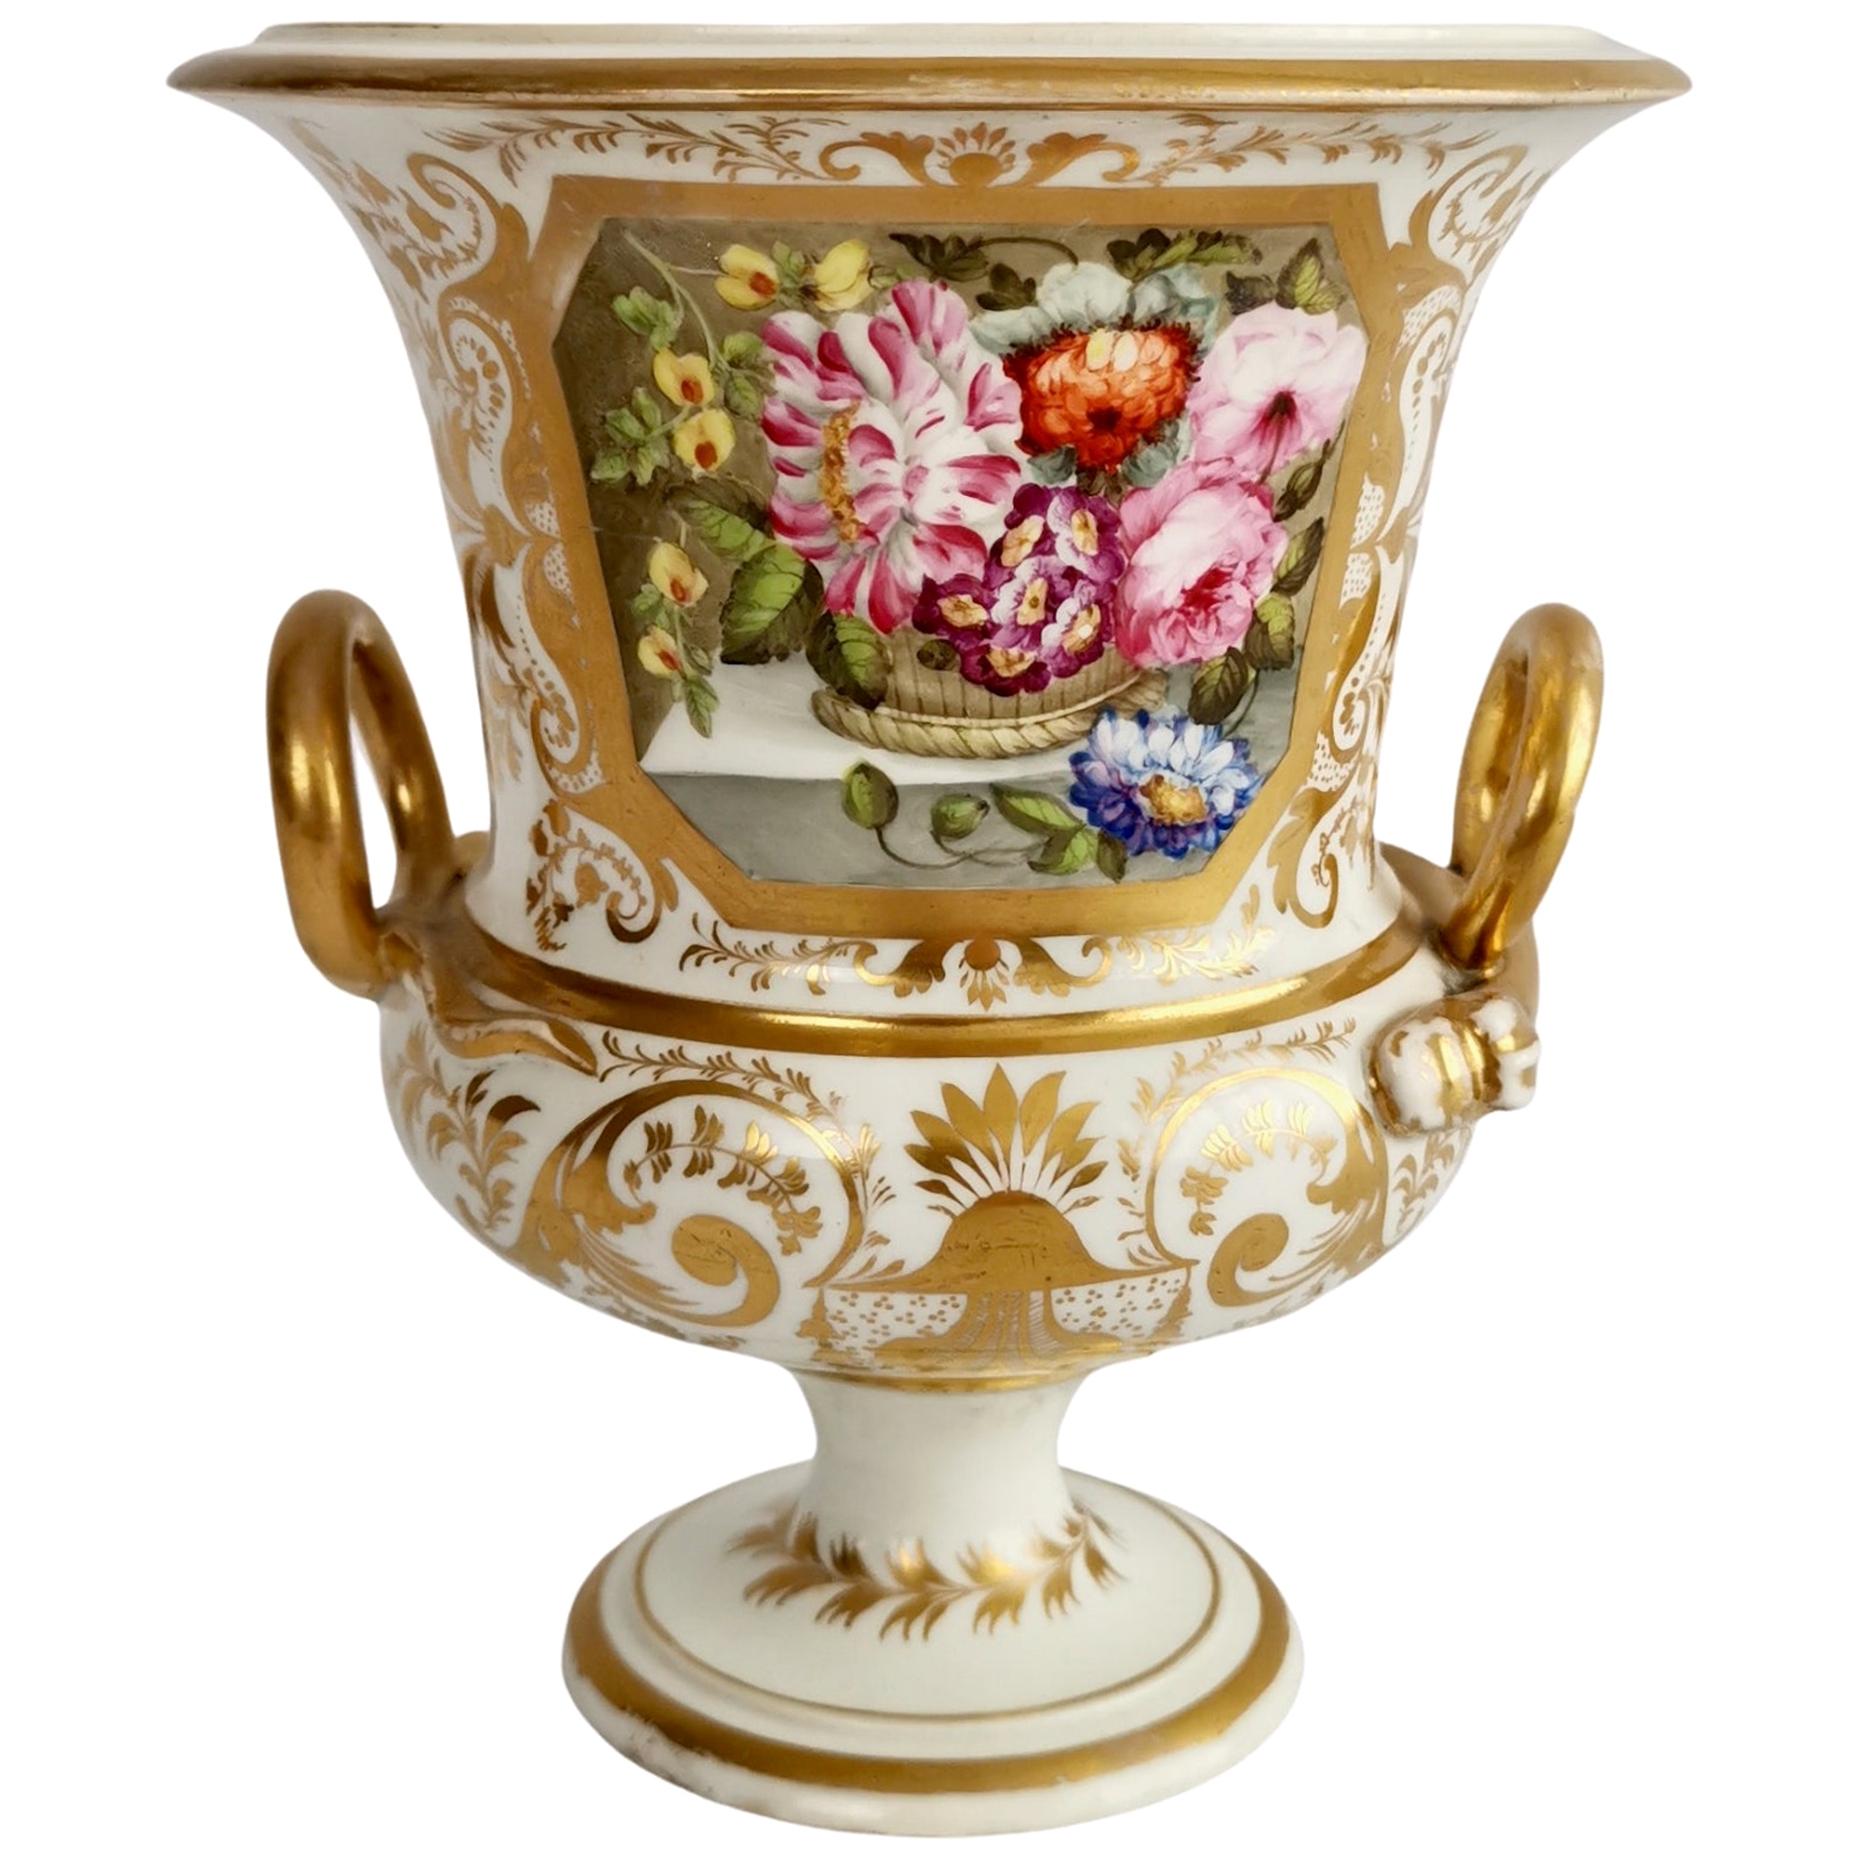 Bloor Derby Porcelain Campana Vase, White with Gilt and Flowers, Regency ca 1815